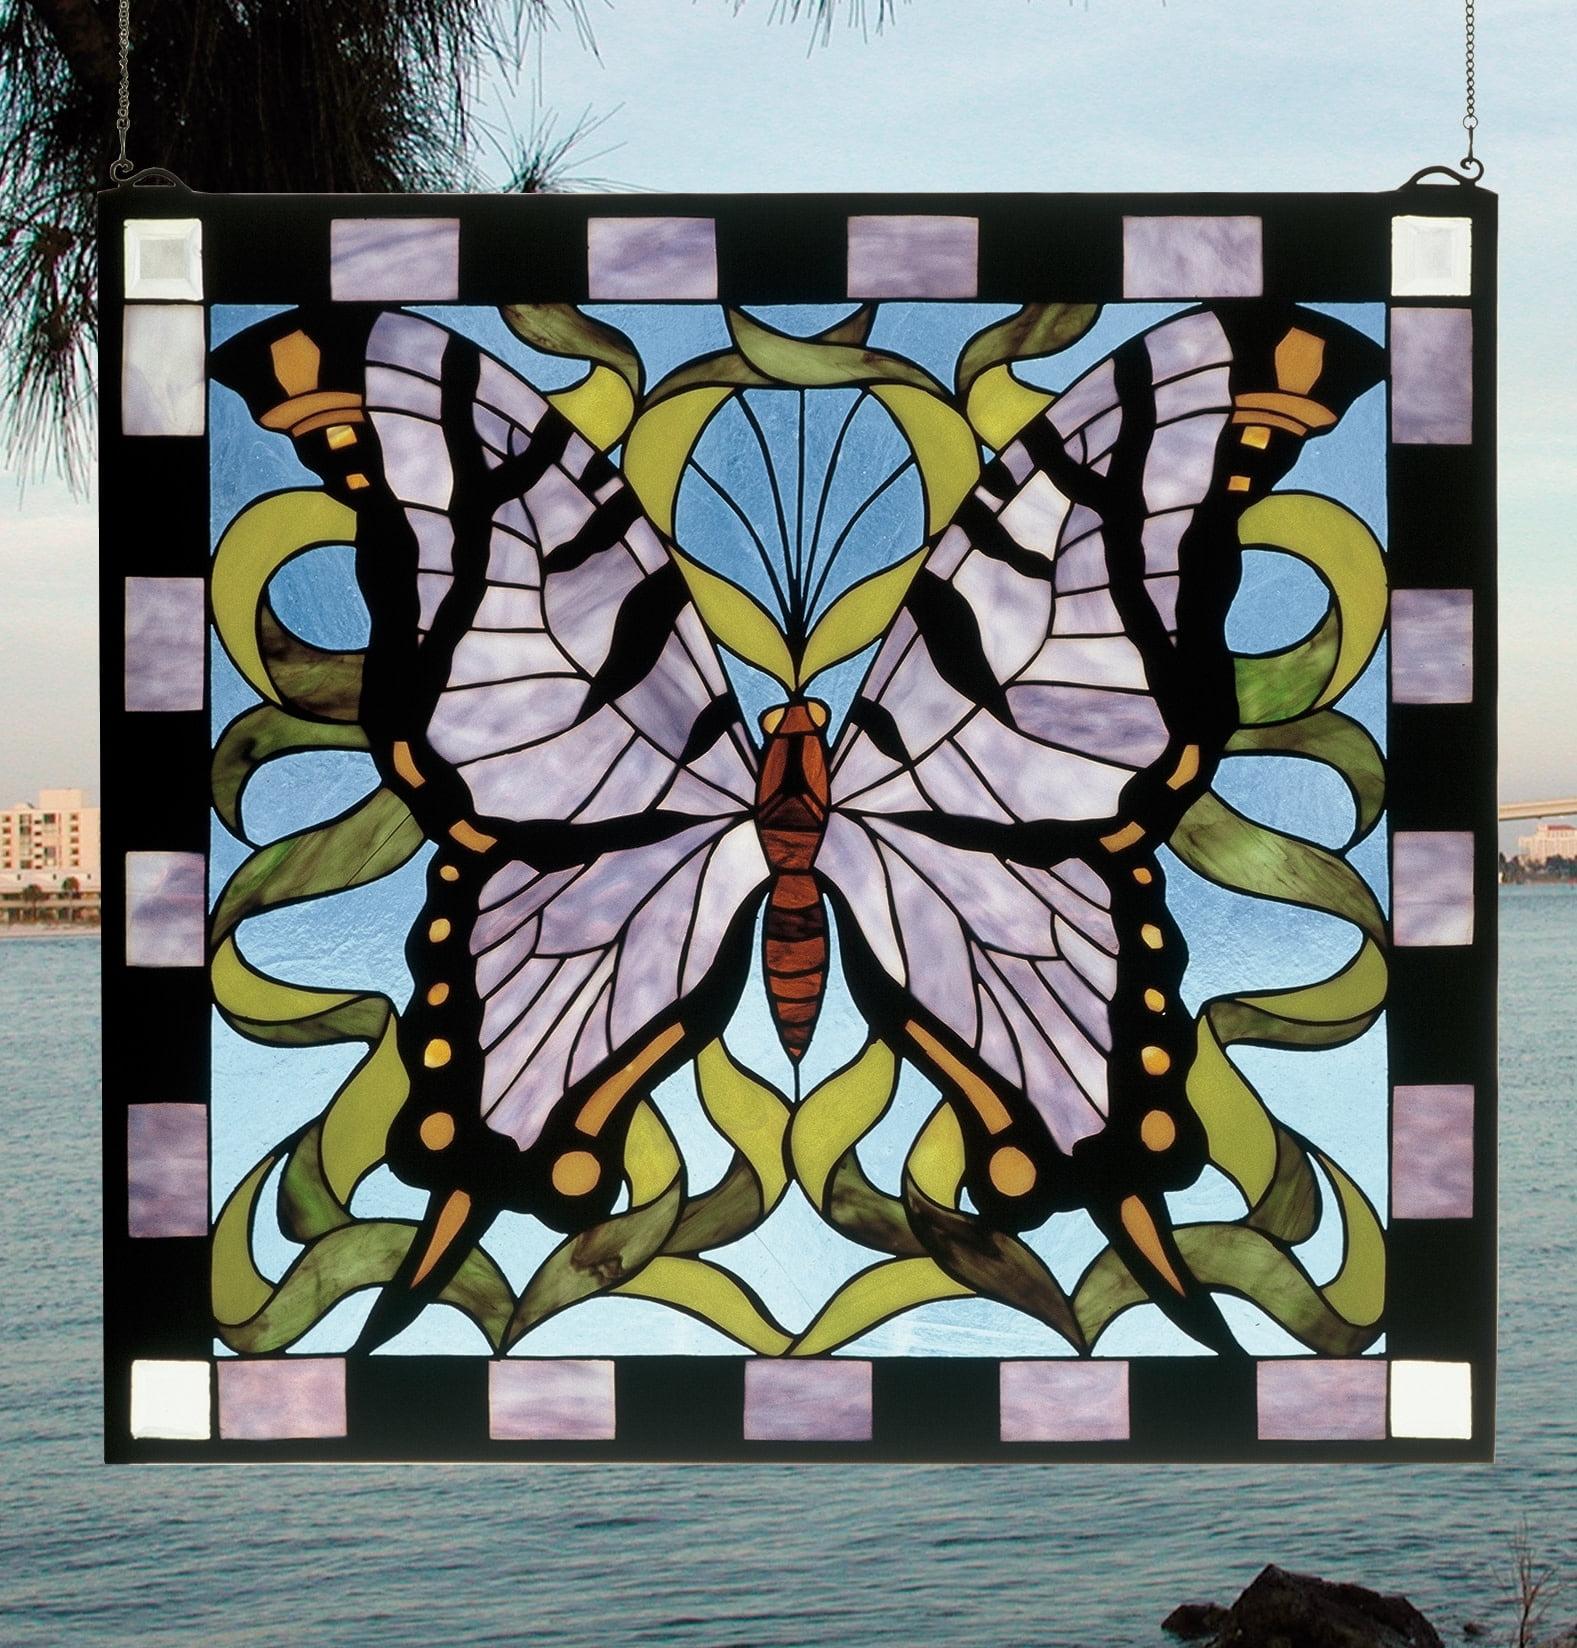 25"W X 23"H Butterfly Stained Glass Window